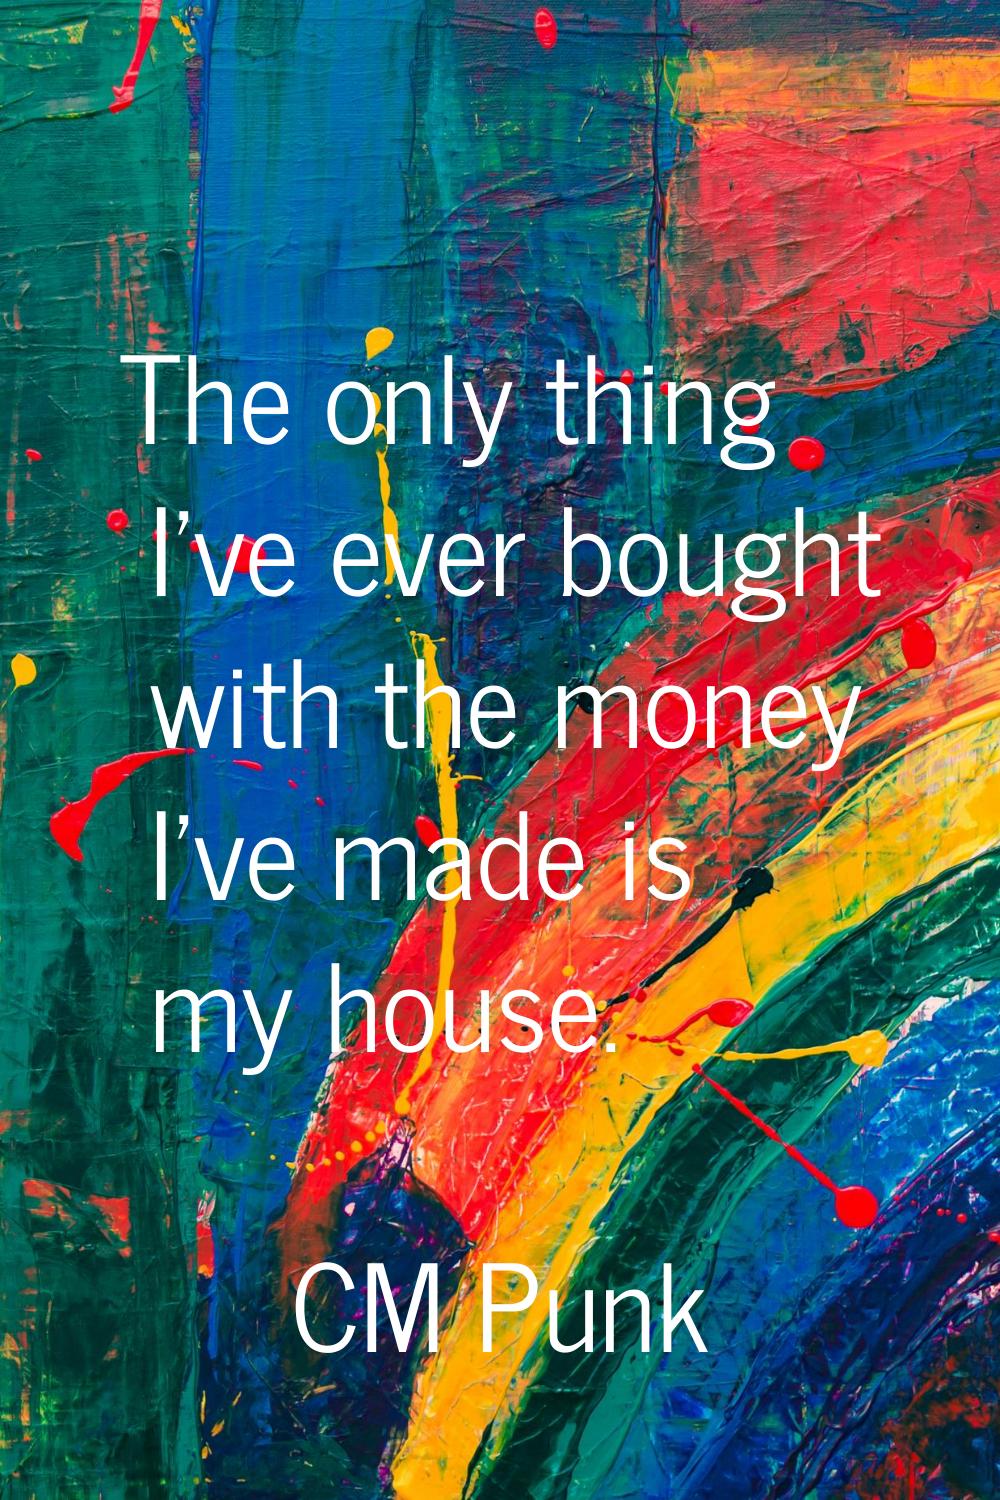 The only thing I've ever bought with the money I've made is my house.